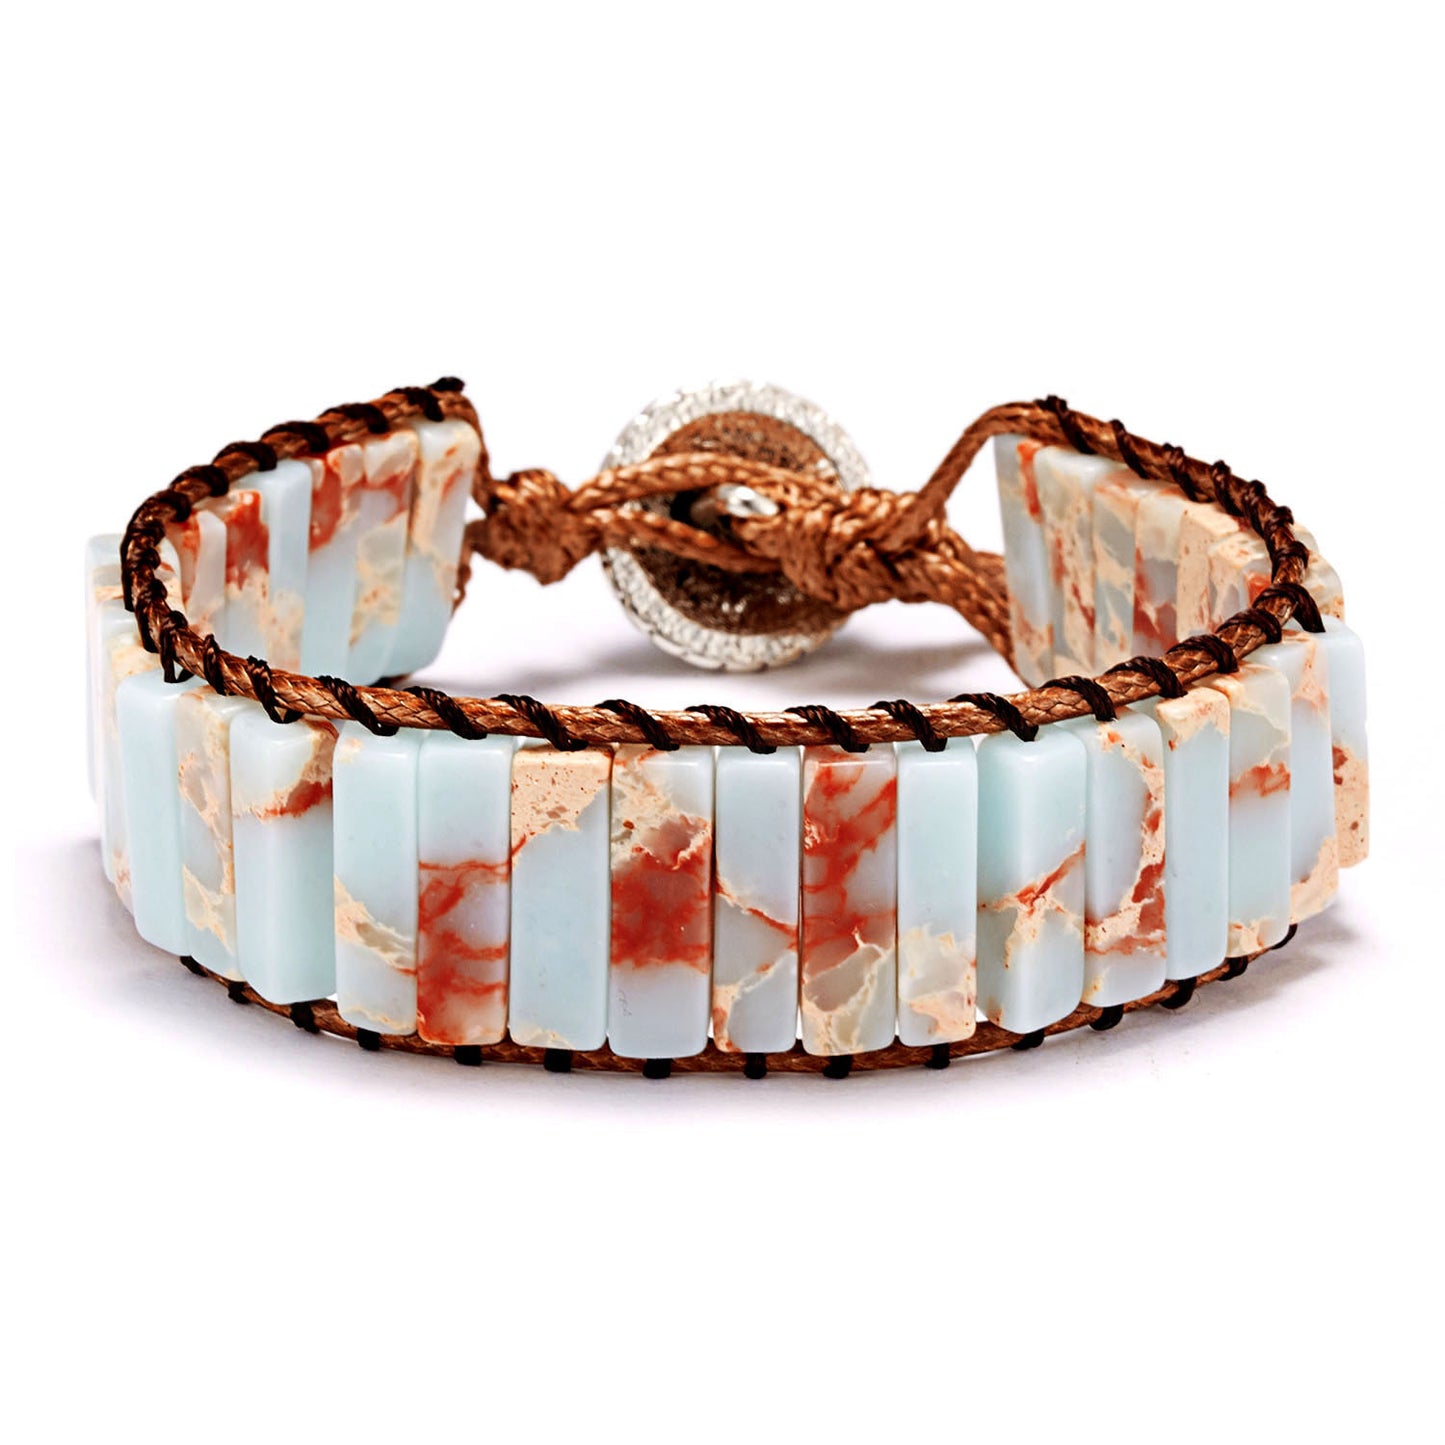 Hand-woven Single-layer Leather Colored Imperial Stone Bracelet